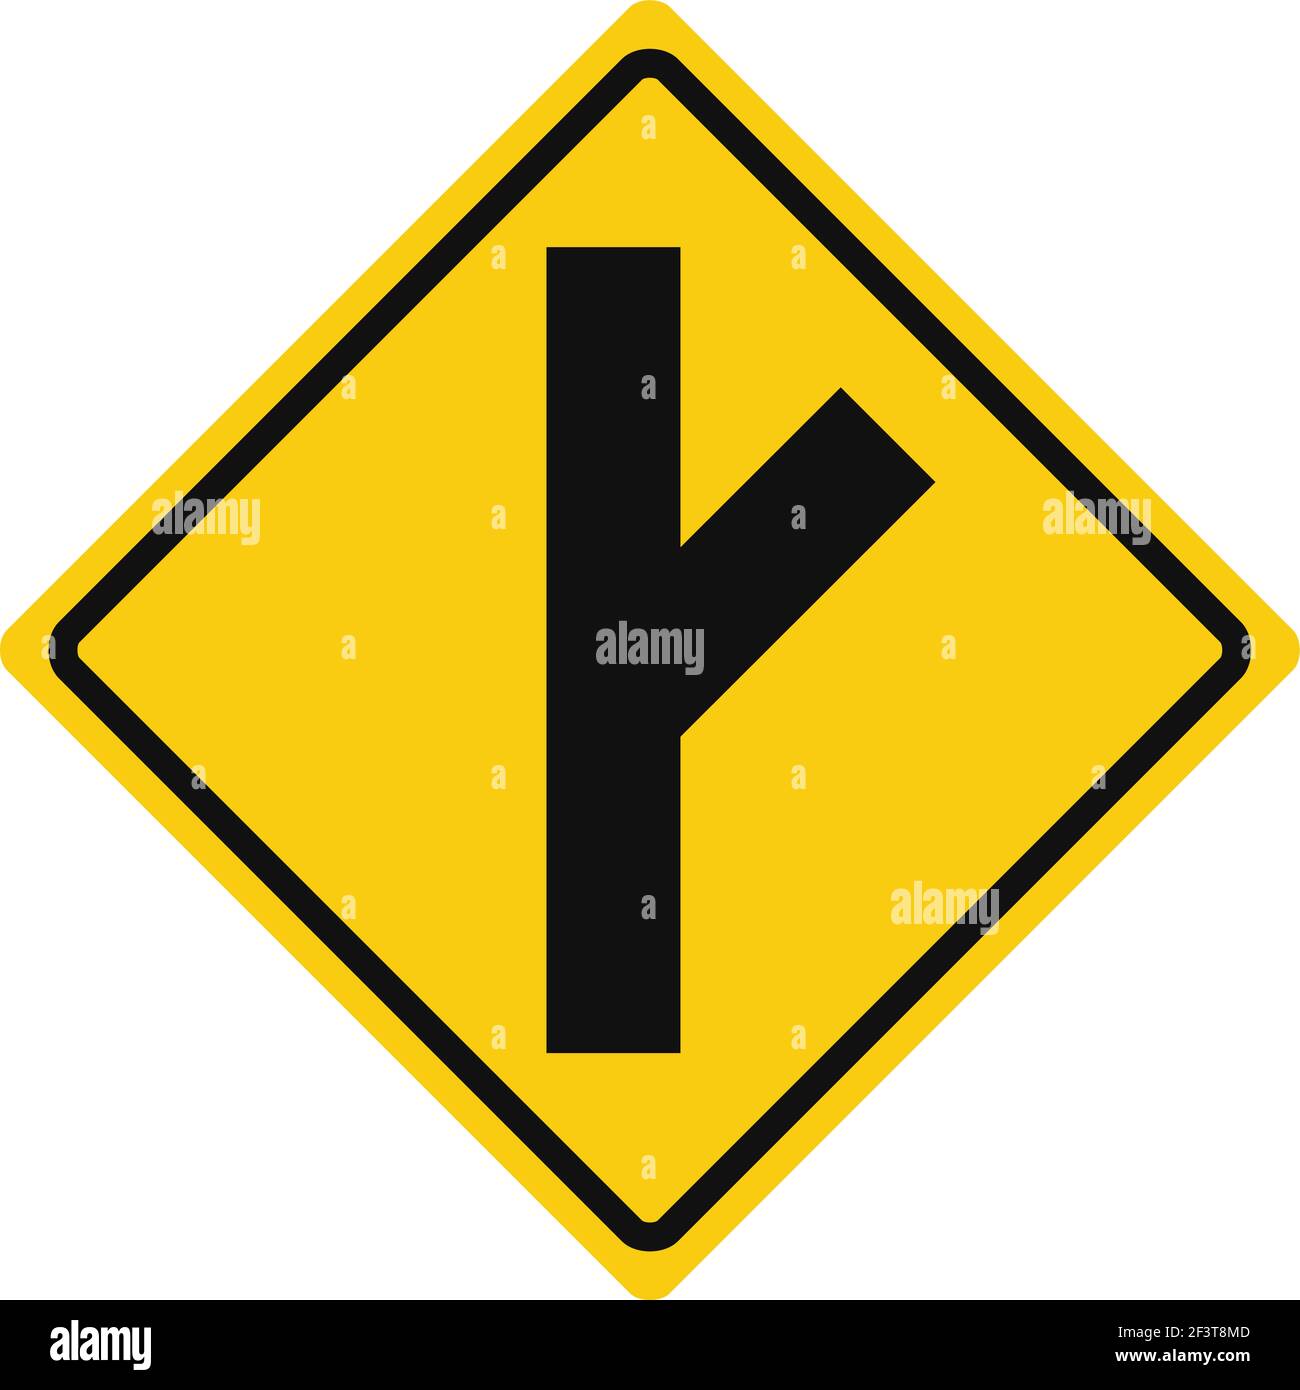 Rhomboid traffic signal in yellow and black, isolated on white background. Warning of side road on the right at a acute angle Stock Vector